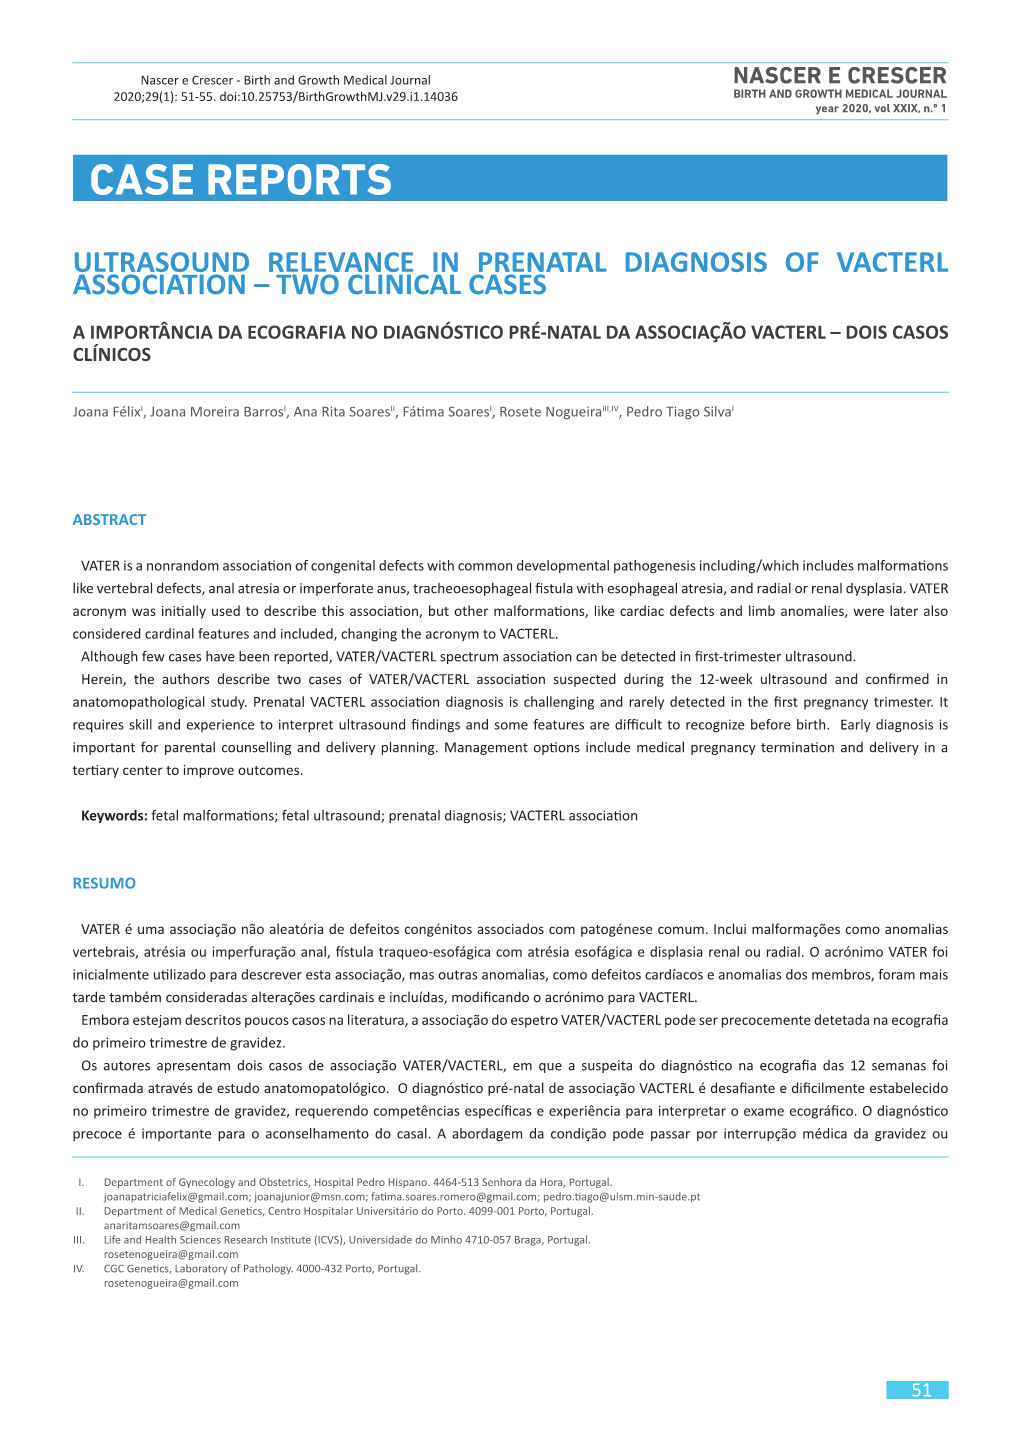 Case Reports Ultrasound Relevance in Prenatal Diagnosis of Vacterl